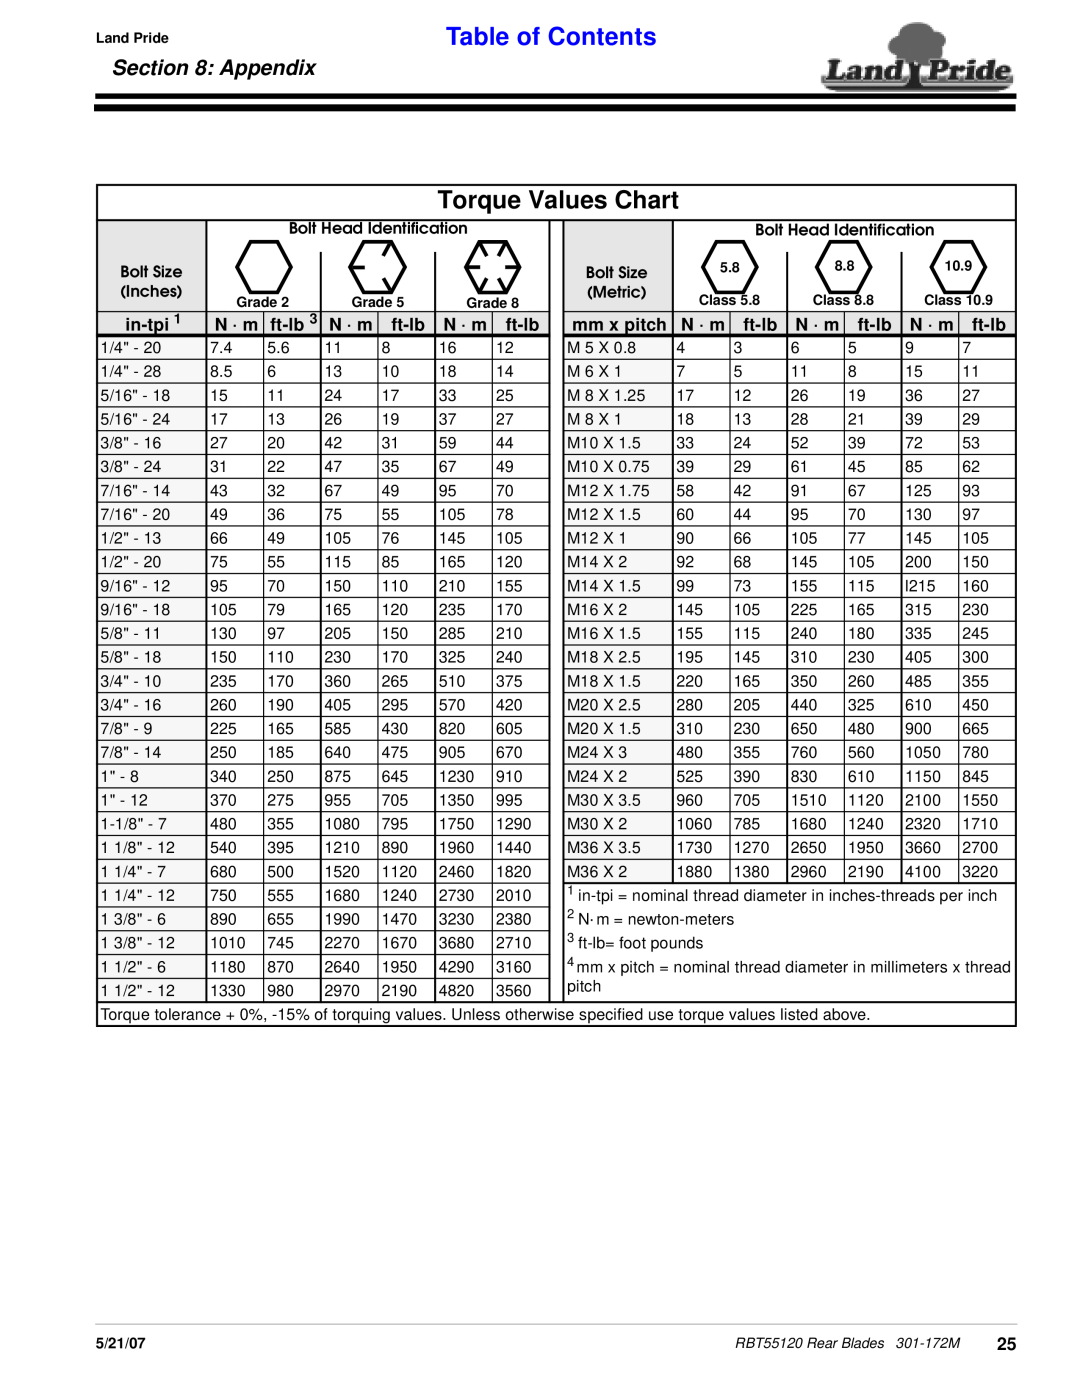 Land Pride RBT55120 manual Torque Values Chart, Appendix, in-tpi, N · m, ft-lb, mm x pitch, Table of Contents 